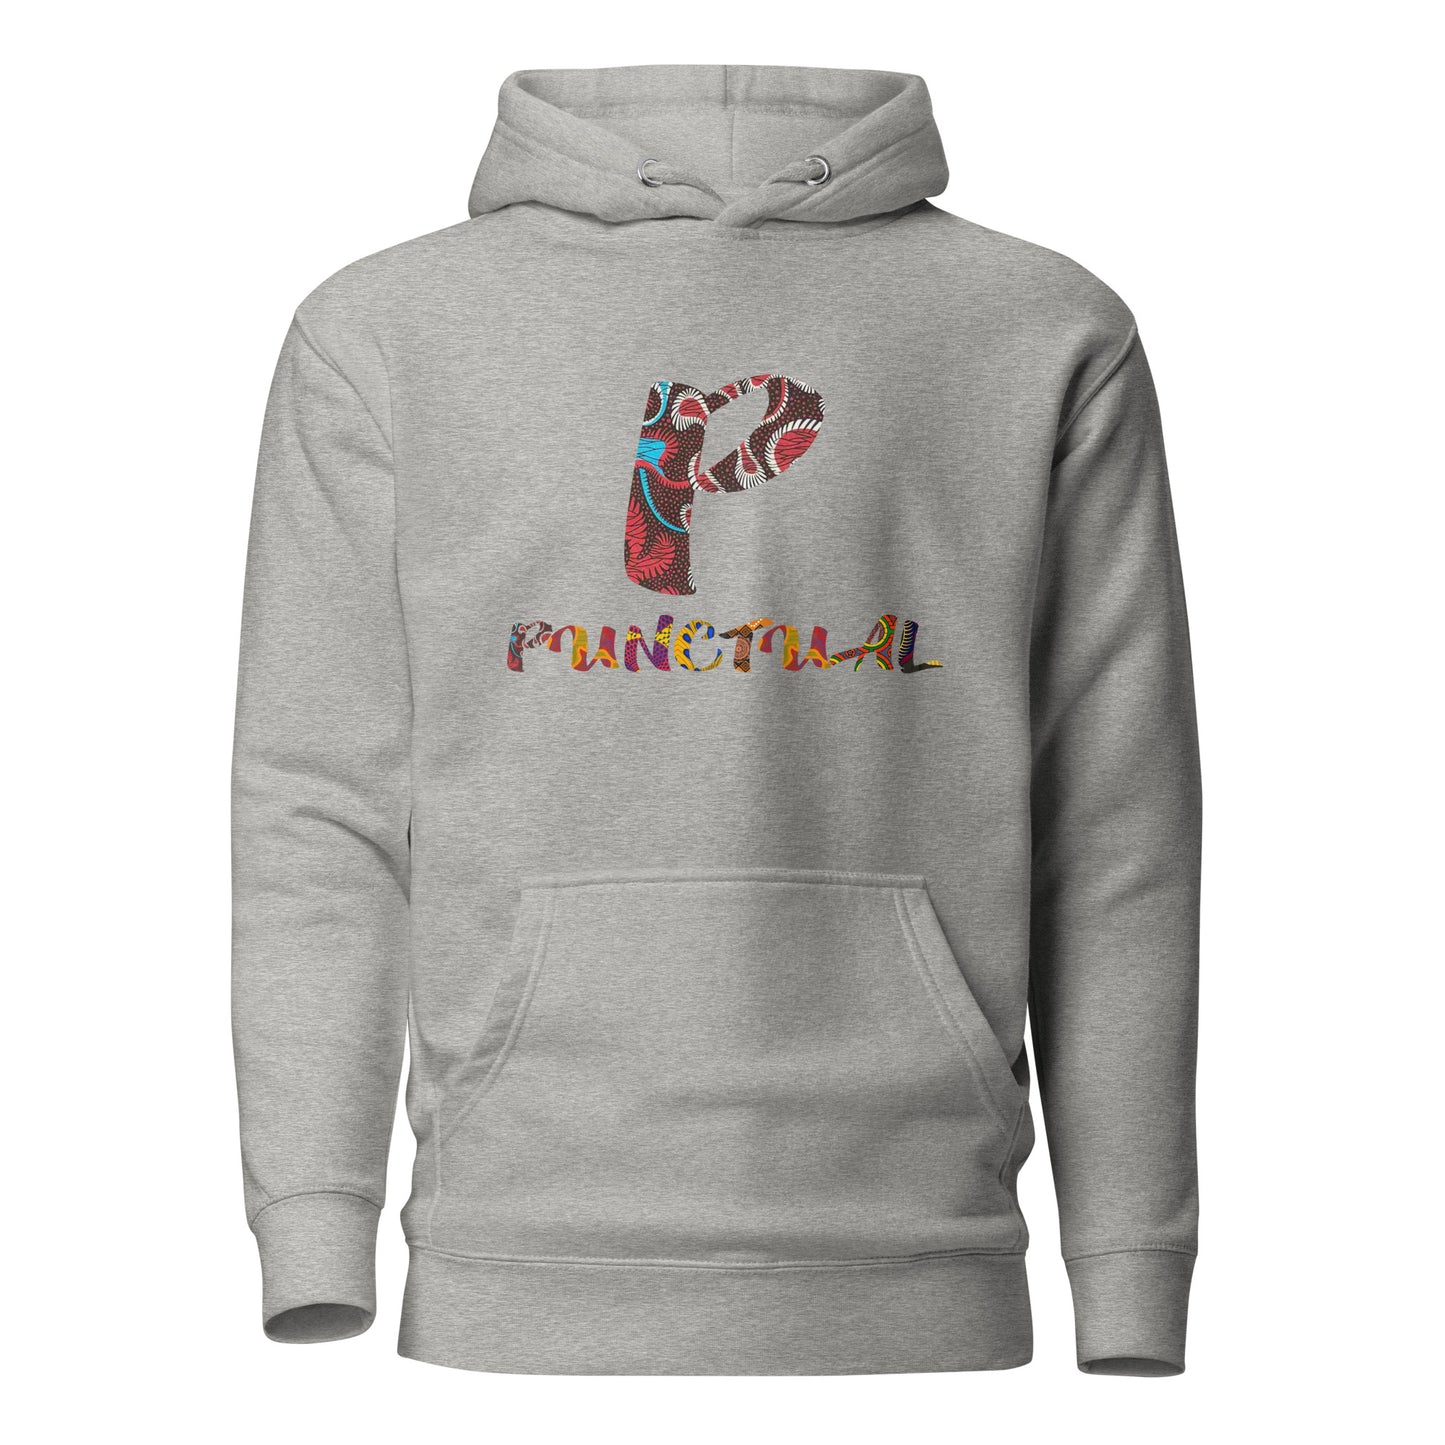 P For Punctual Unisex Afro Graphic Hoodie